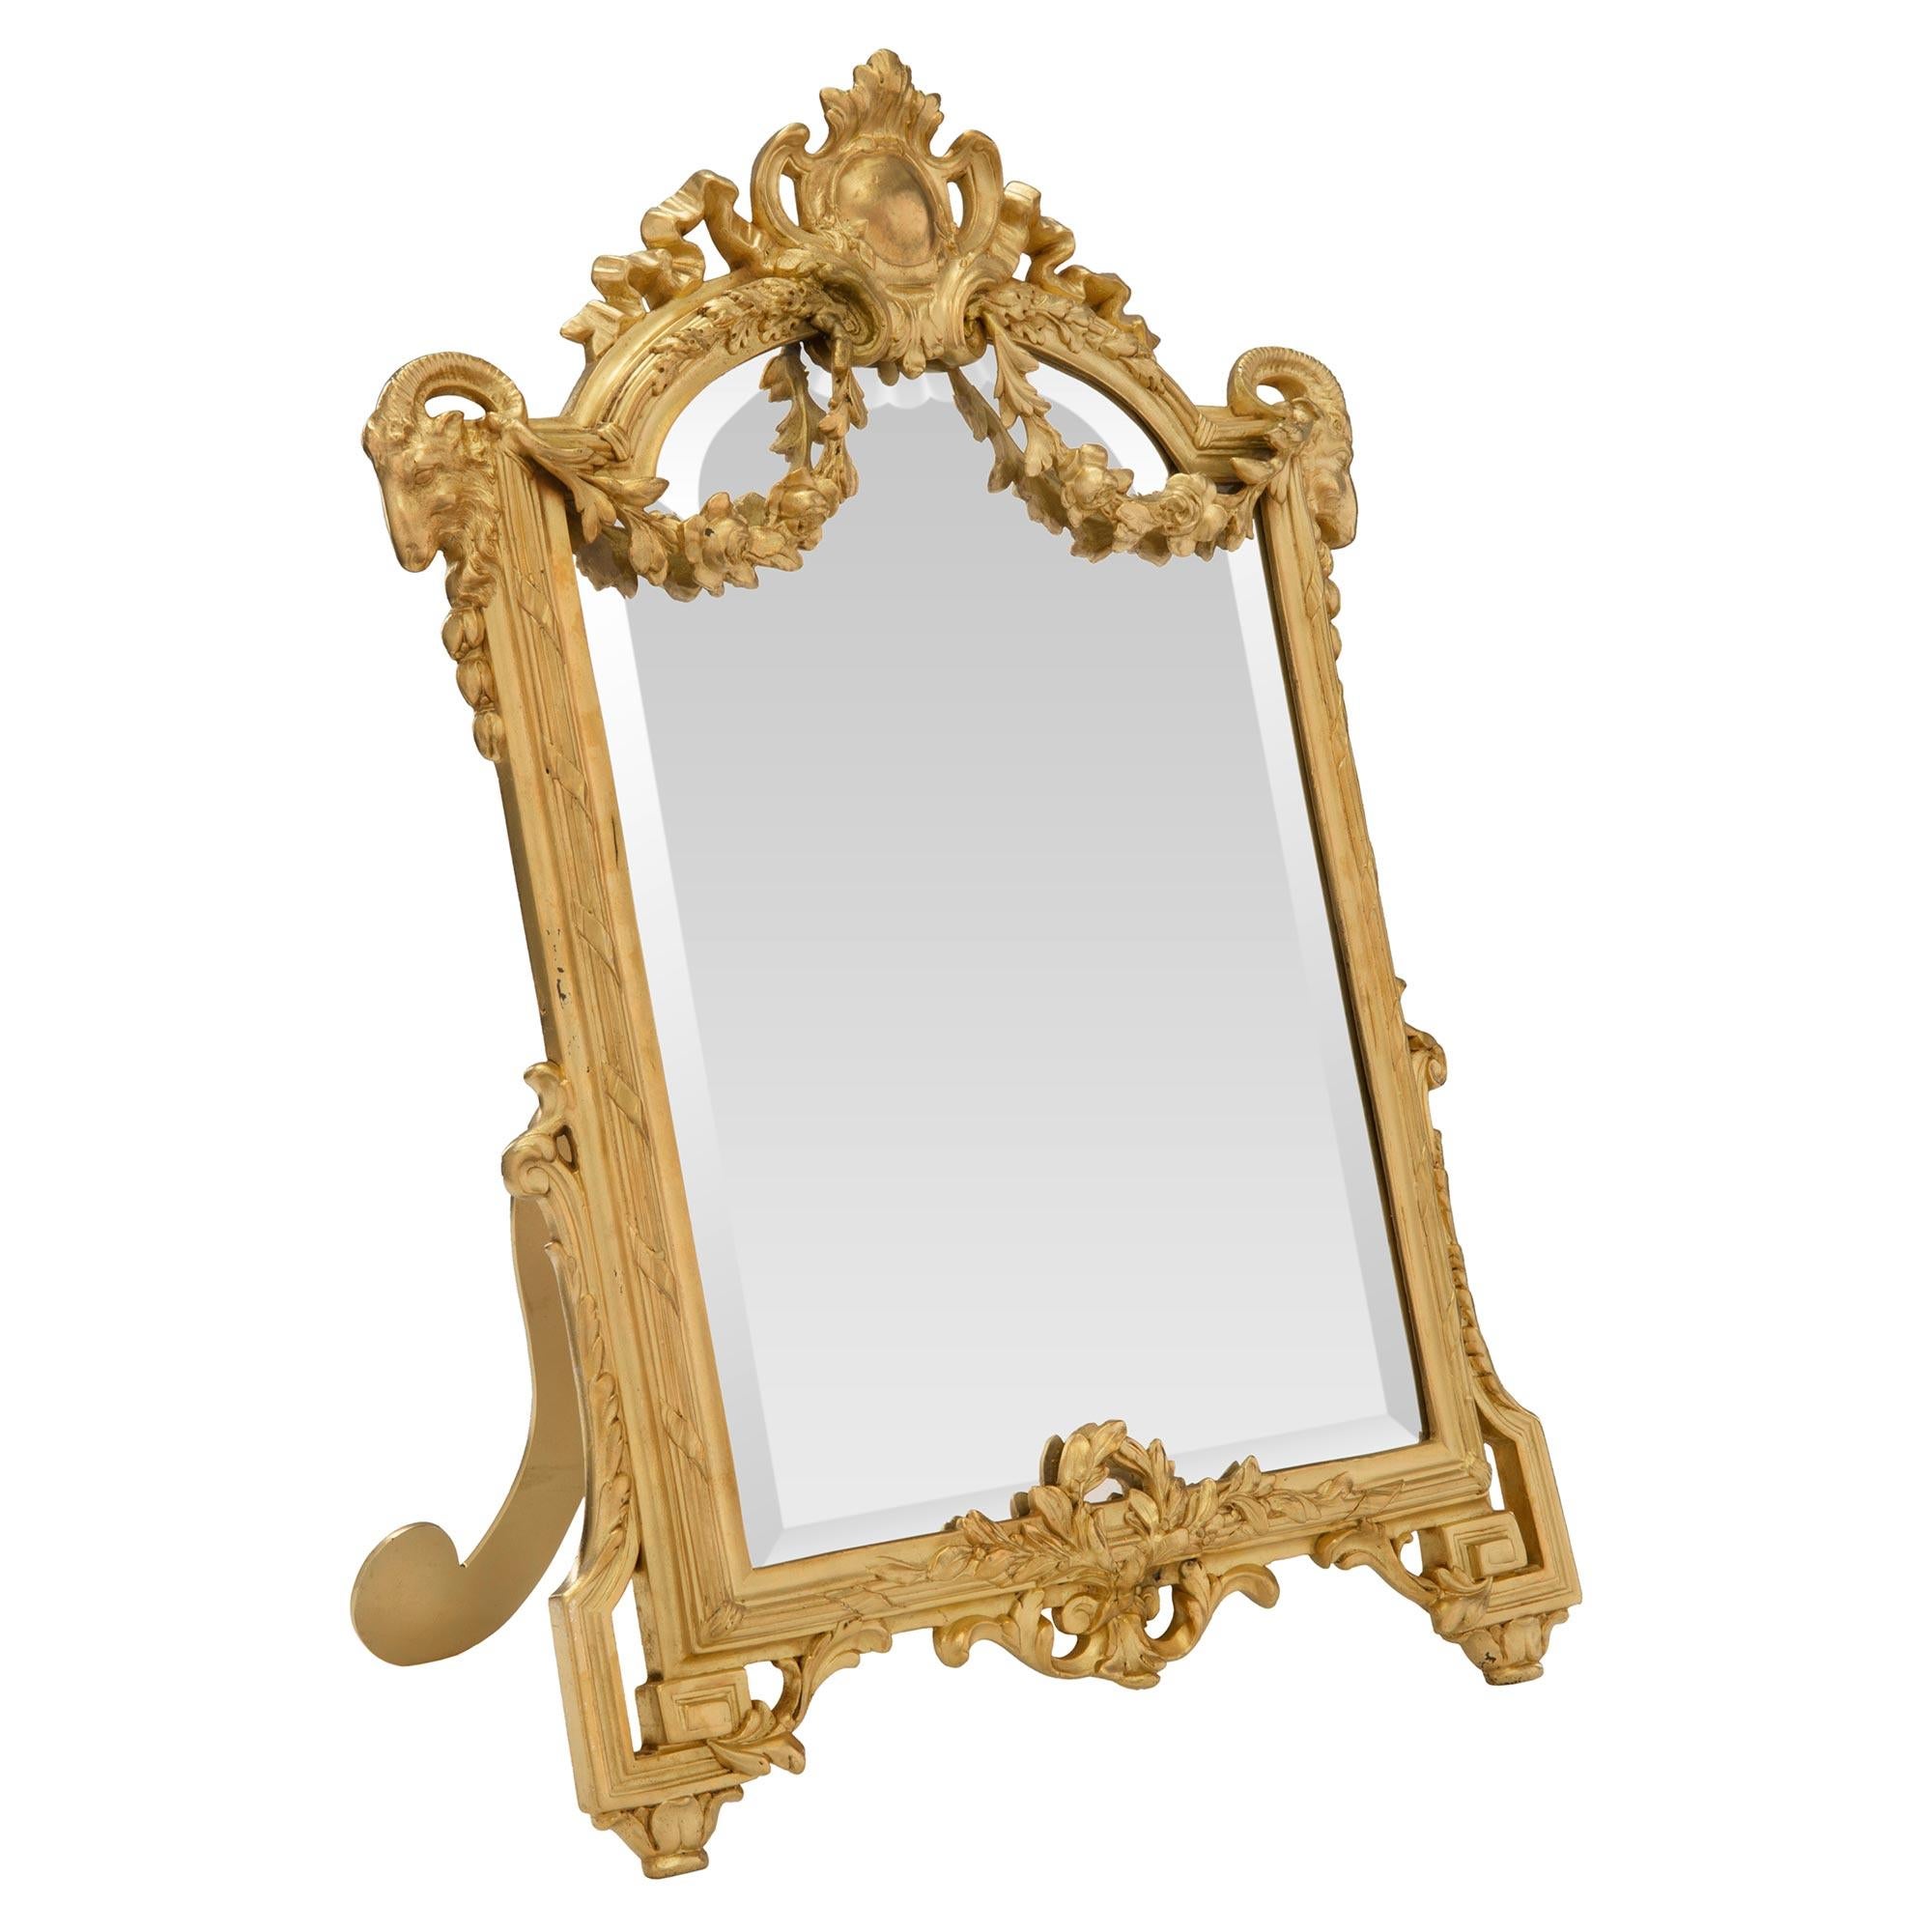 A charming and most elegant French 19th century Louis XVI st. ormolu freestanding vanity mirror. The original beveled mirror plate is set within a fine mottled frame with a lovely tied fluted border. At the base are Greek key shaped supports with